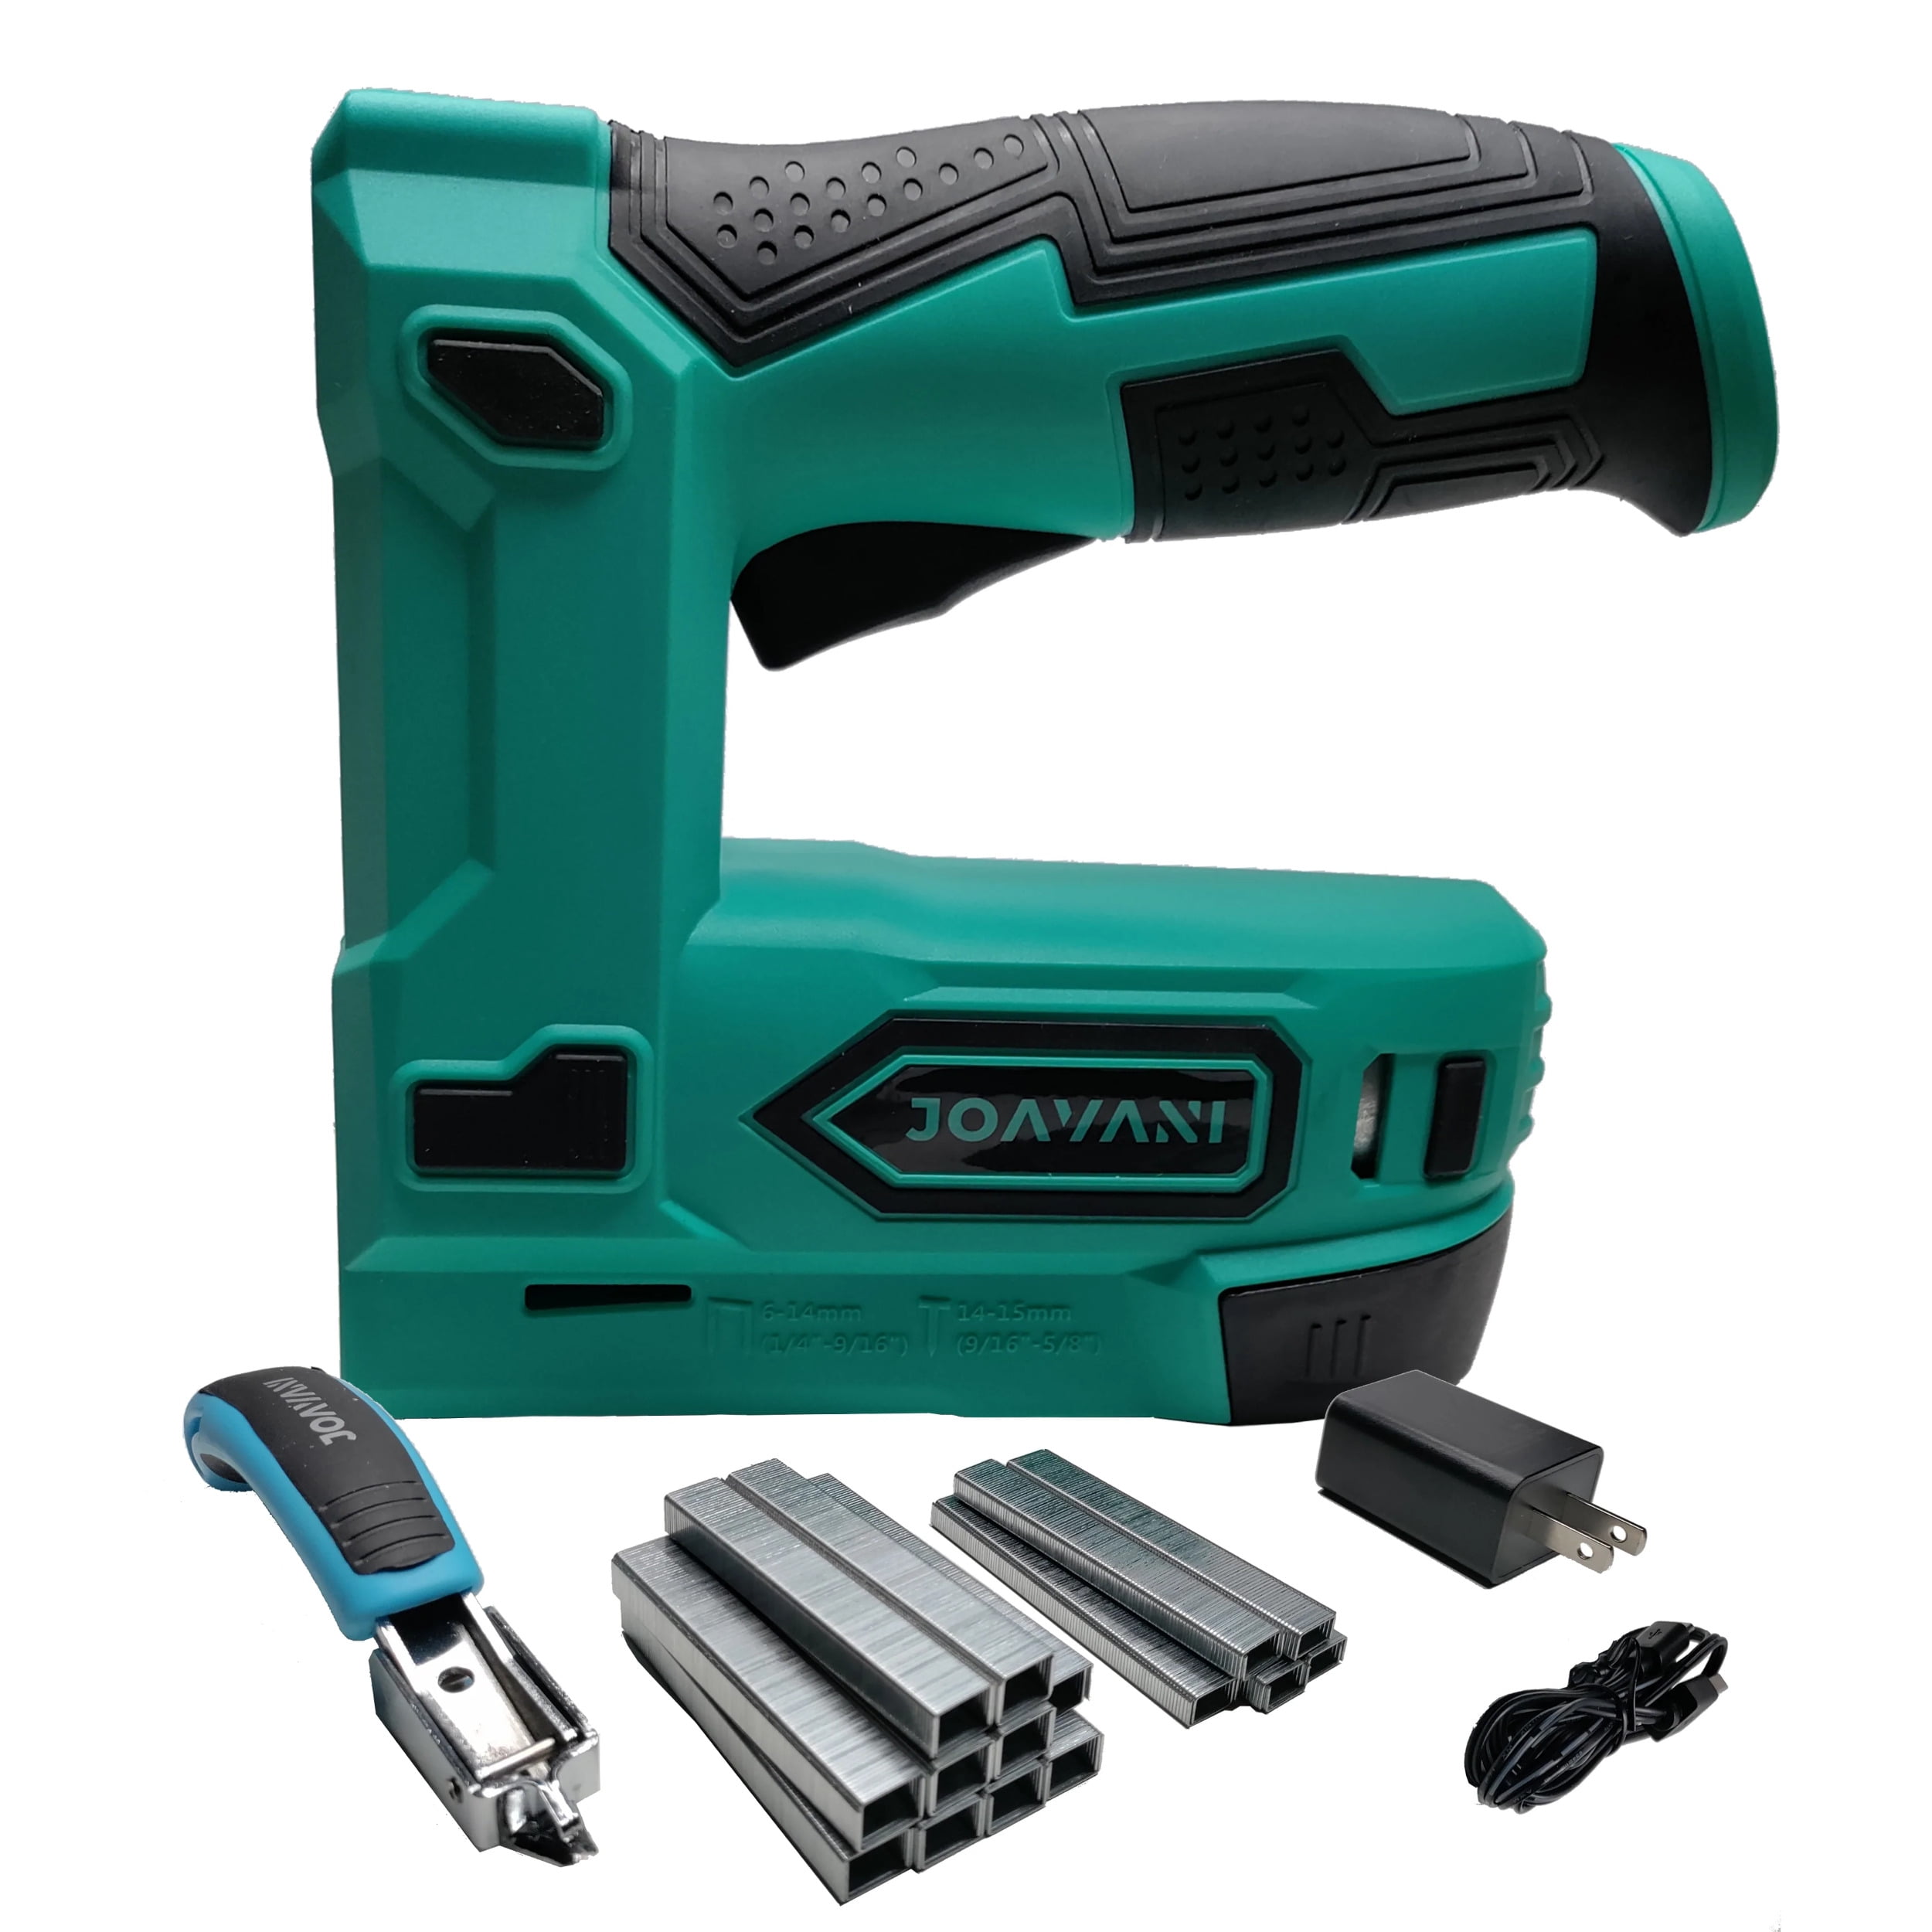 WorkPro 3.6V Power Electric Cordless 2-in-1 Staple and Nail Gun, 2.0Ah Battery Powered Stapler for Upholstery, Carpentry, Crafts, DIY, Including USB